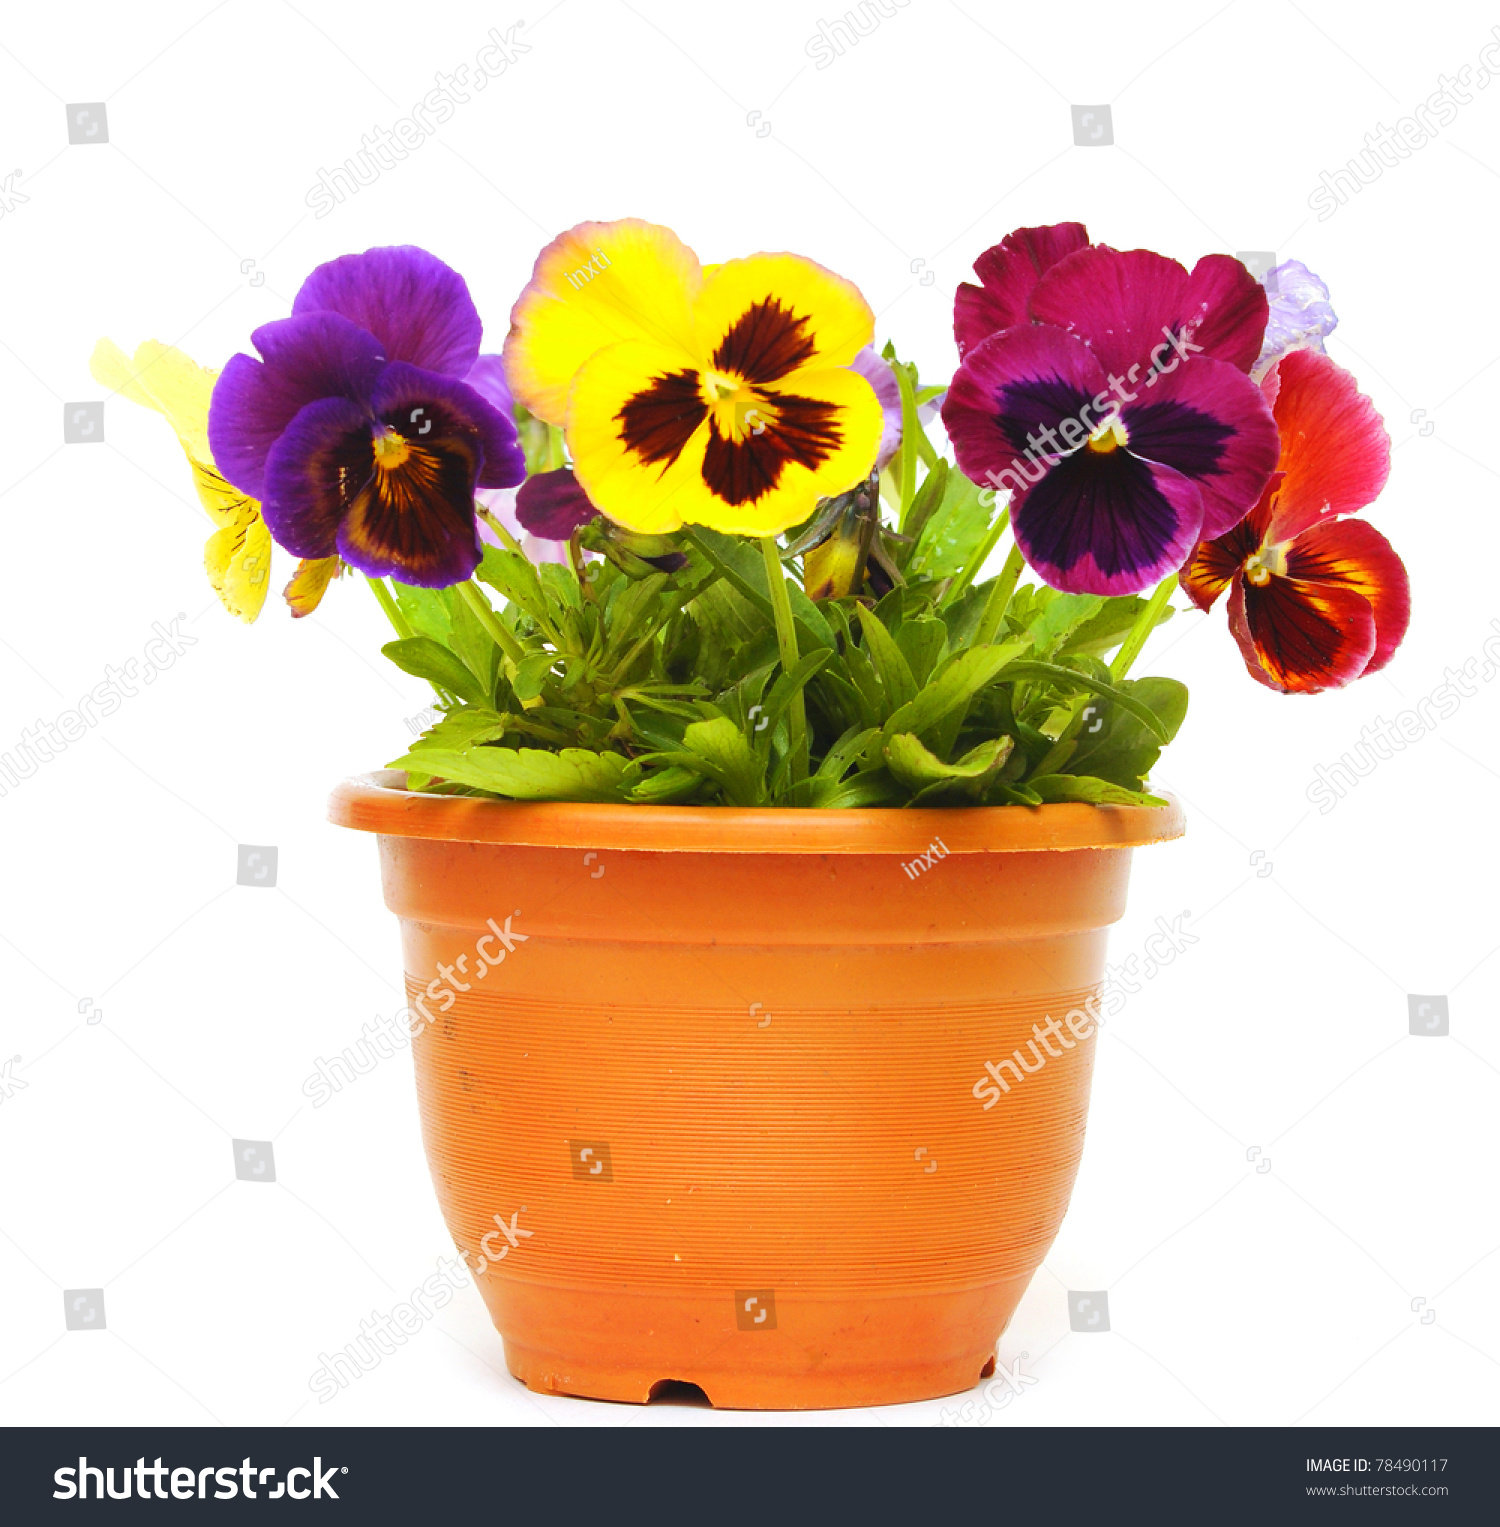 Beautiful Violet Flower Pot Isolated On Stock Photo 78490117  Shutterstock